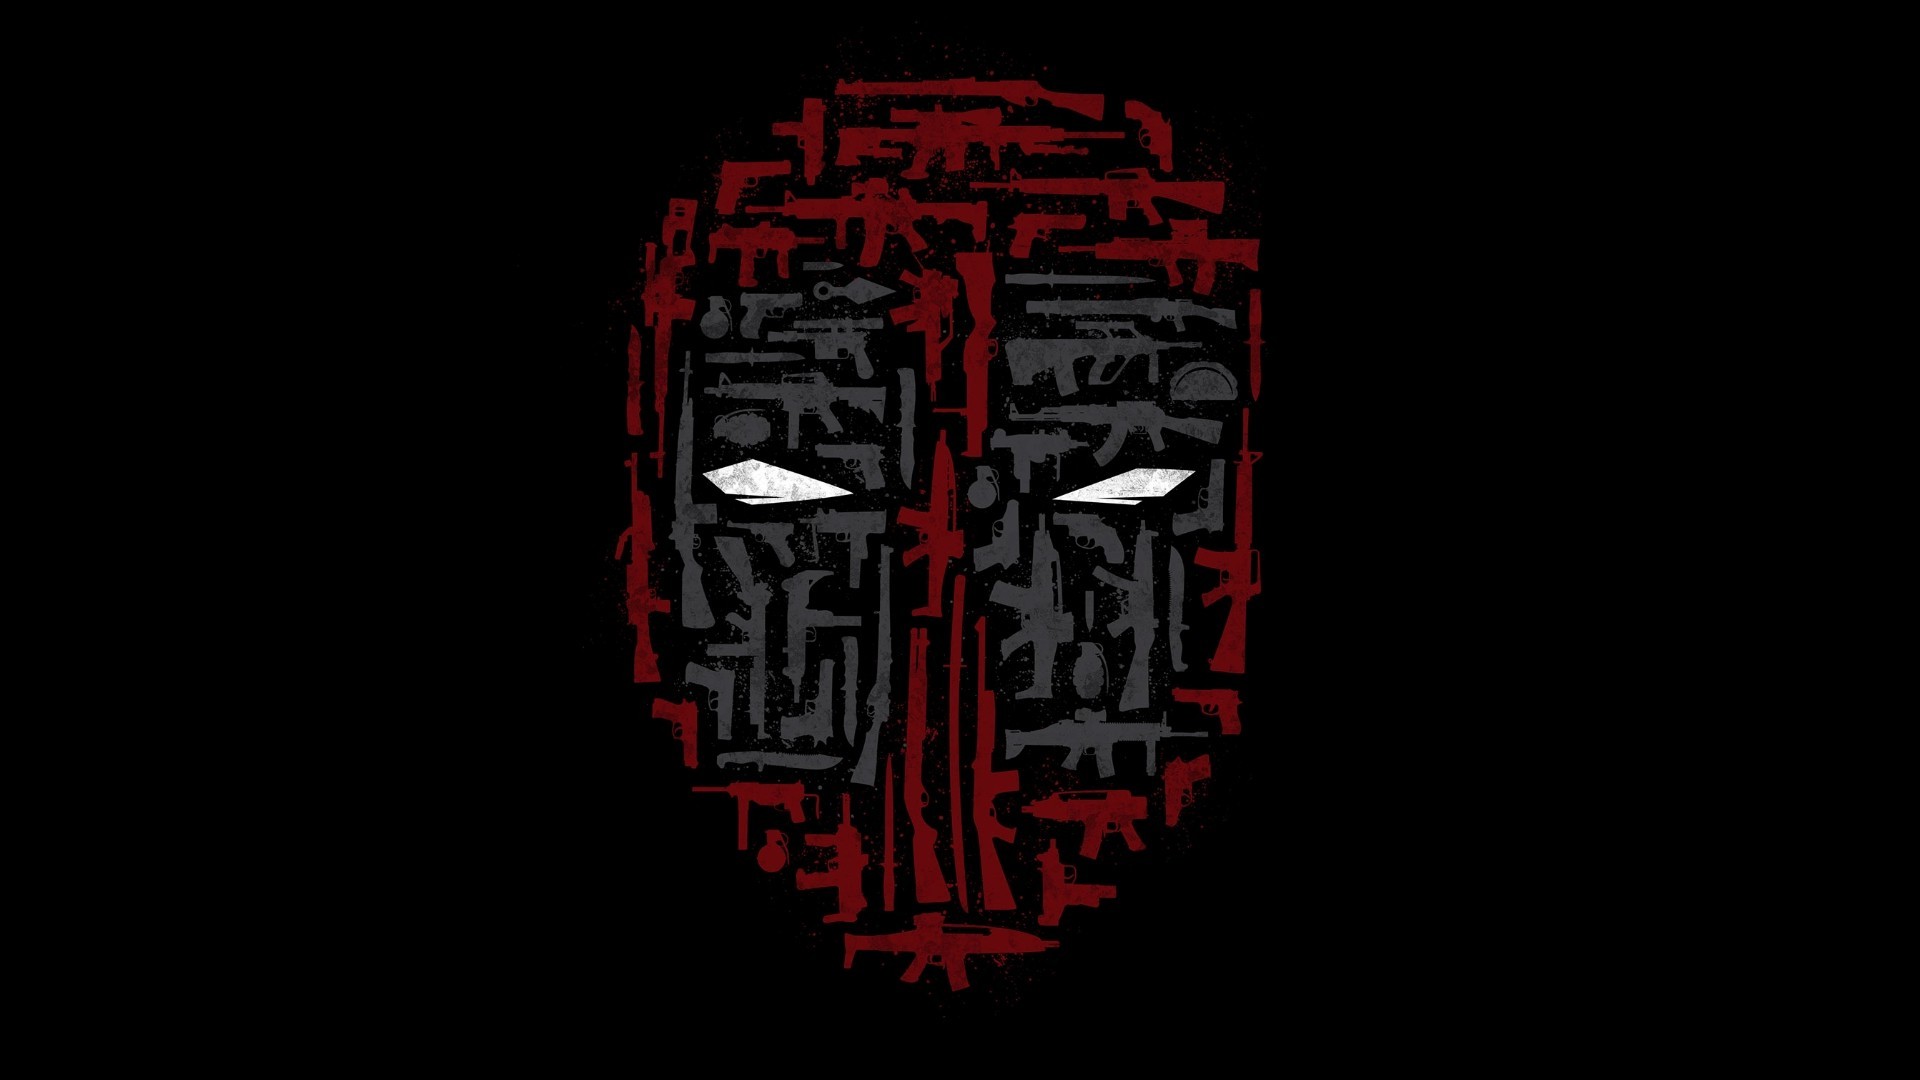 Deadpool Weapon Mask Minimalism Collage Wallpapers